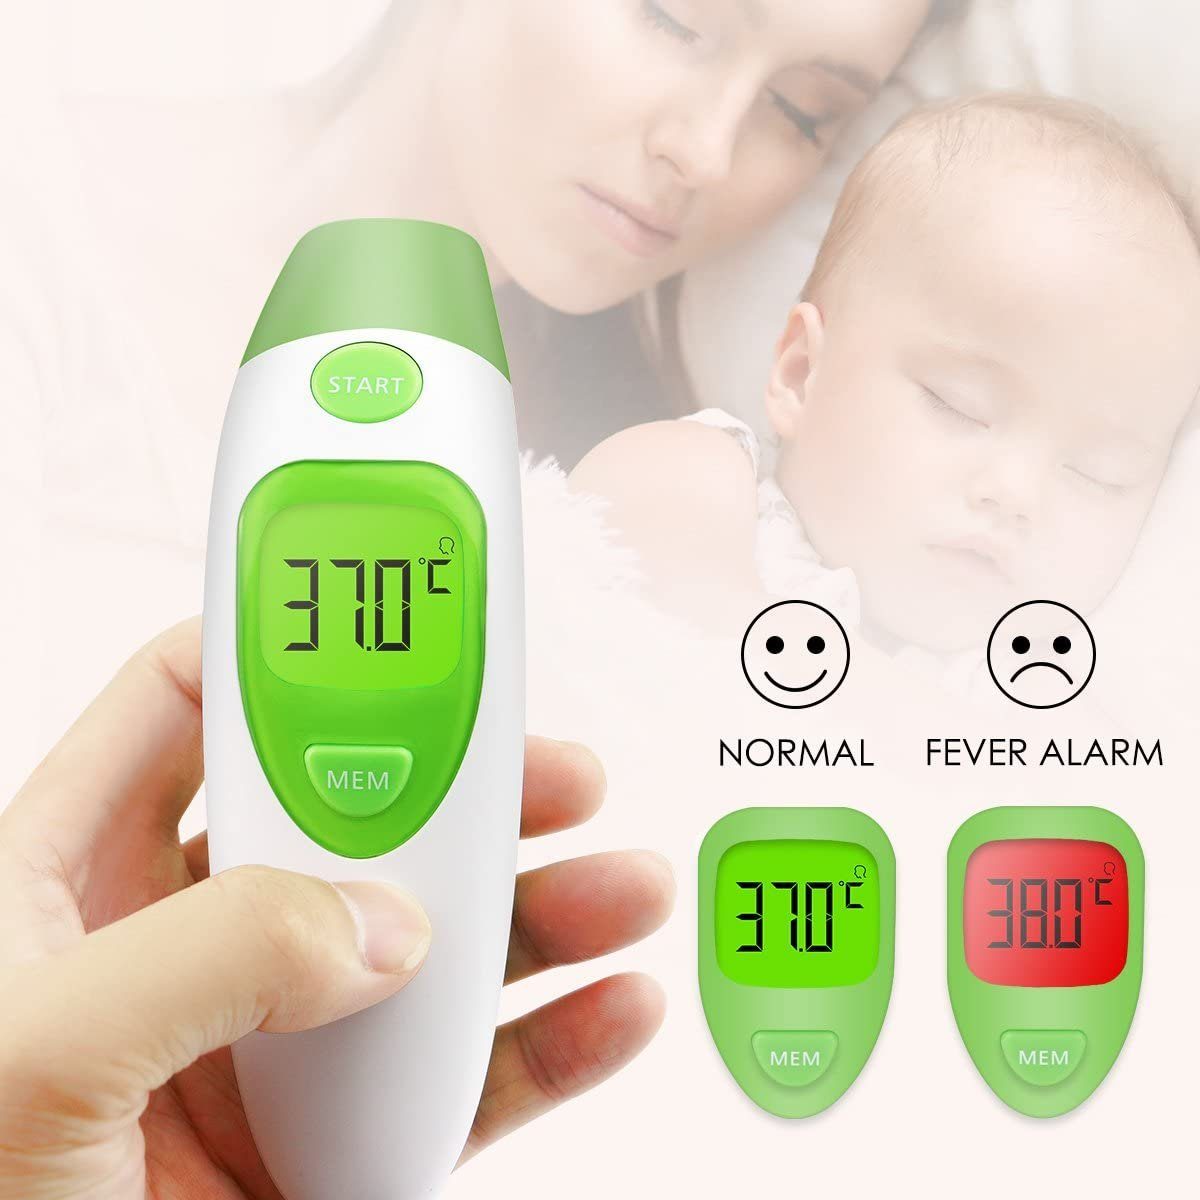 Broadcare Ohr-Fieberthermometer, 4in1 Infrarot Fieberthermometer Stirn Stirnthermometer kontaktlos digital Thermometer Ohr LCD